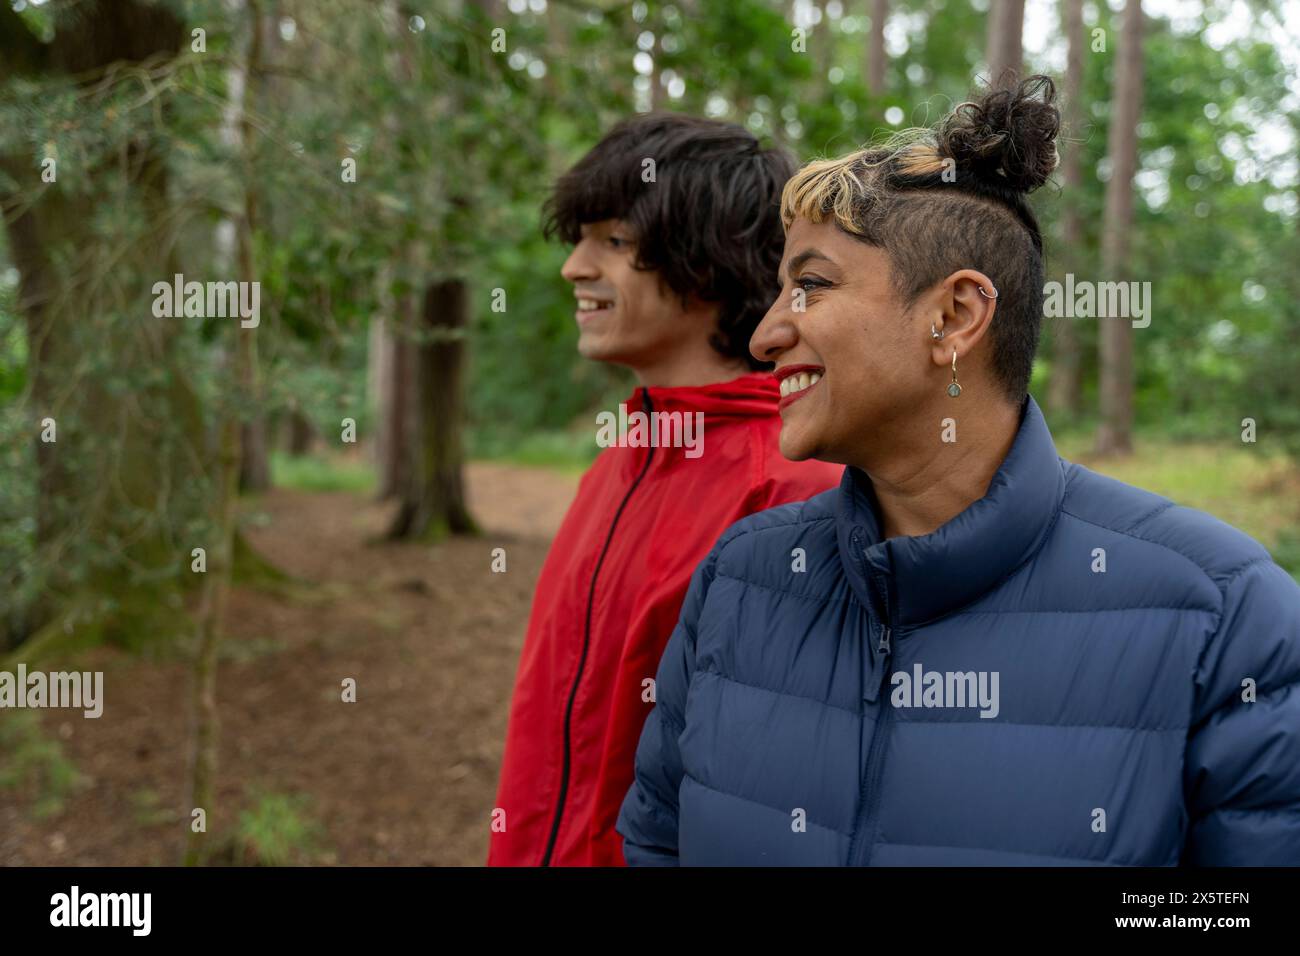 Smiling mother and son hiking in forest Stock Photo